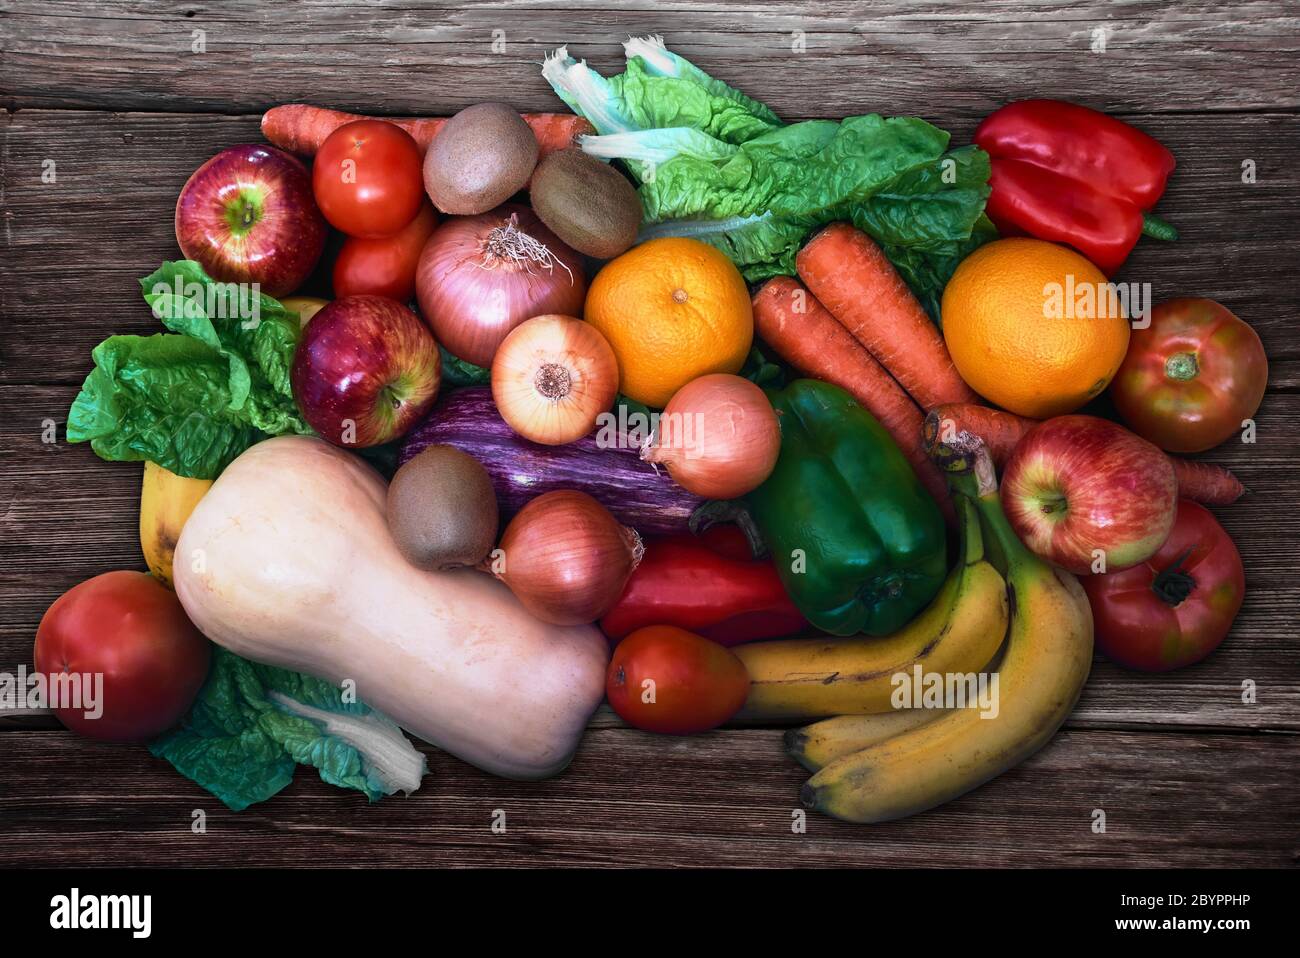 Different types of fruits and vegetables Stock Photo